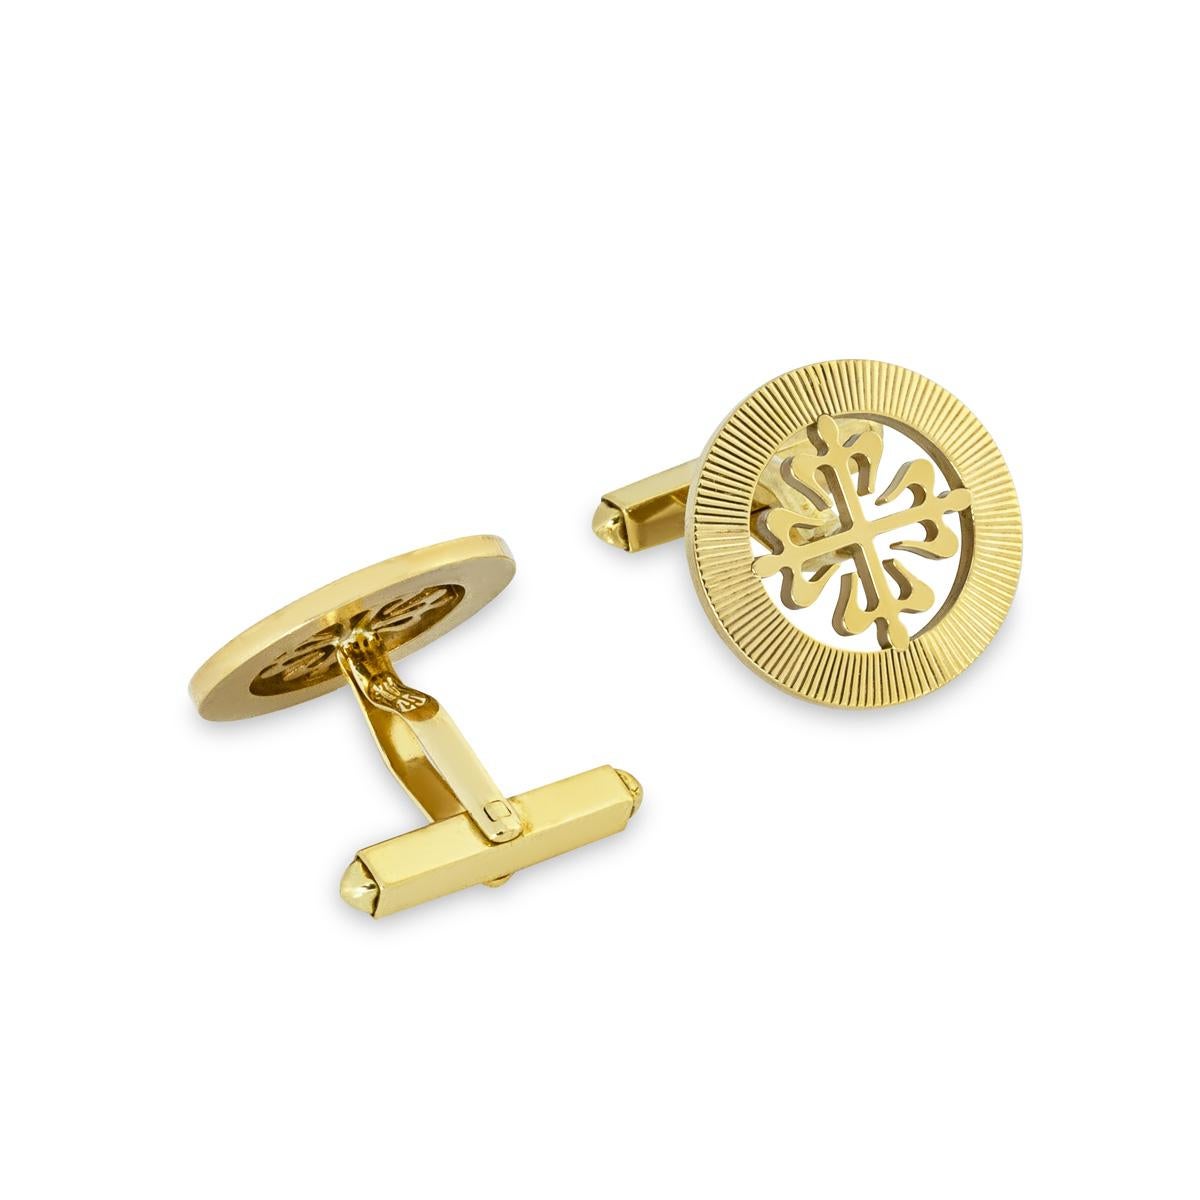 Patek Philippe Calatrava Cross Cufflinks Yellow Gold In Excellent Condition For Sale In London, GB